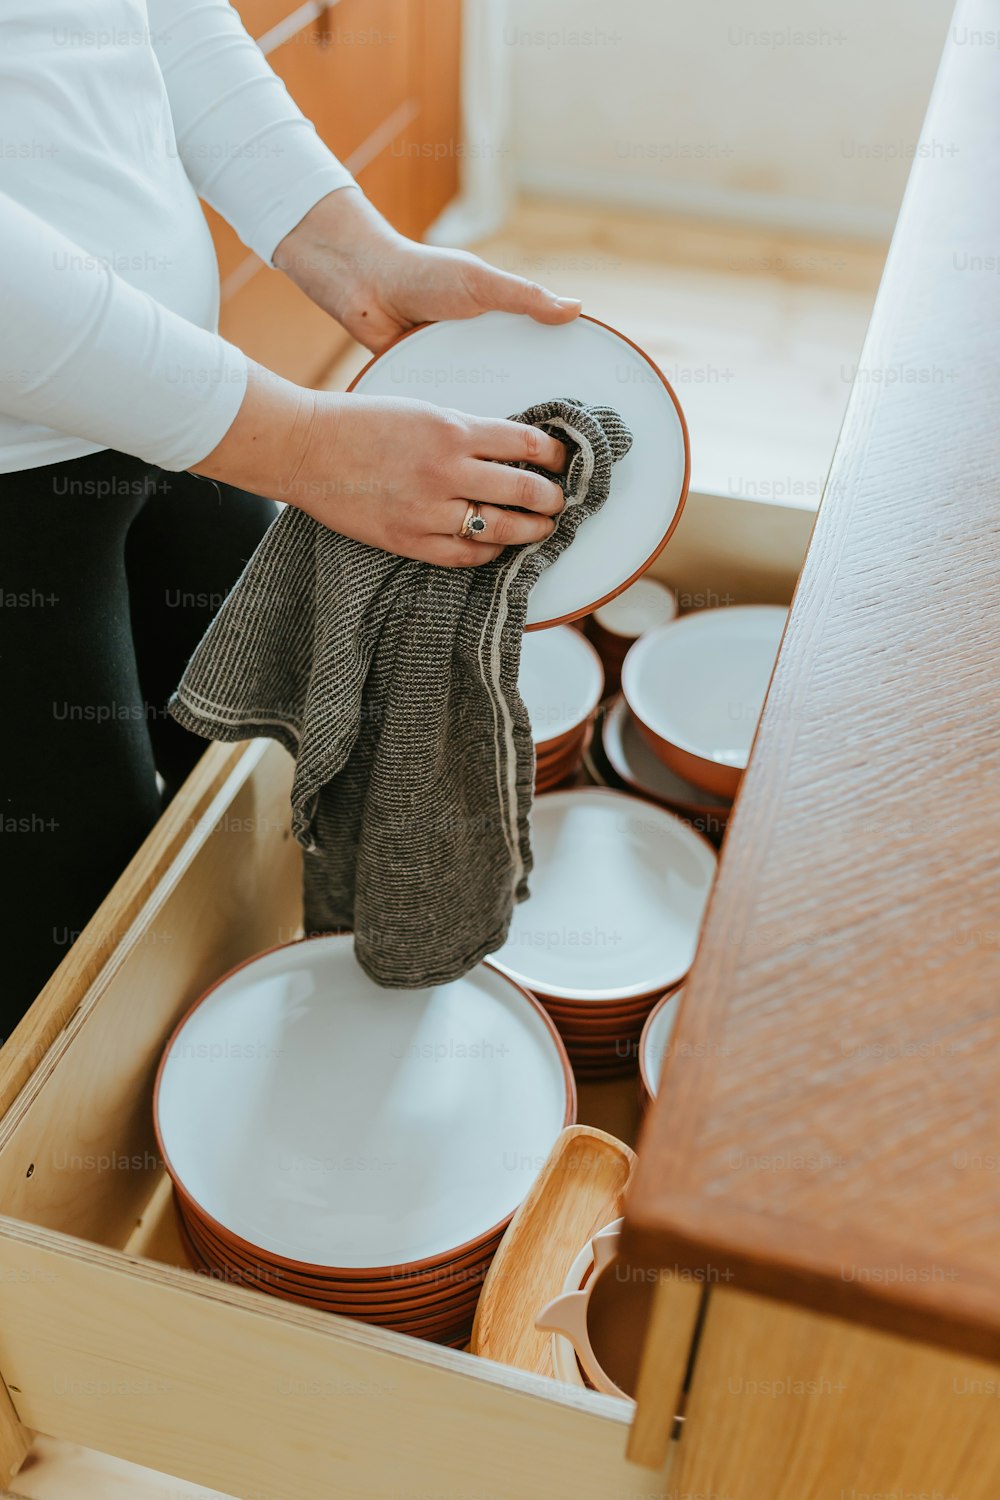 a woman is holding a plate in a drawer